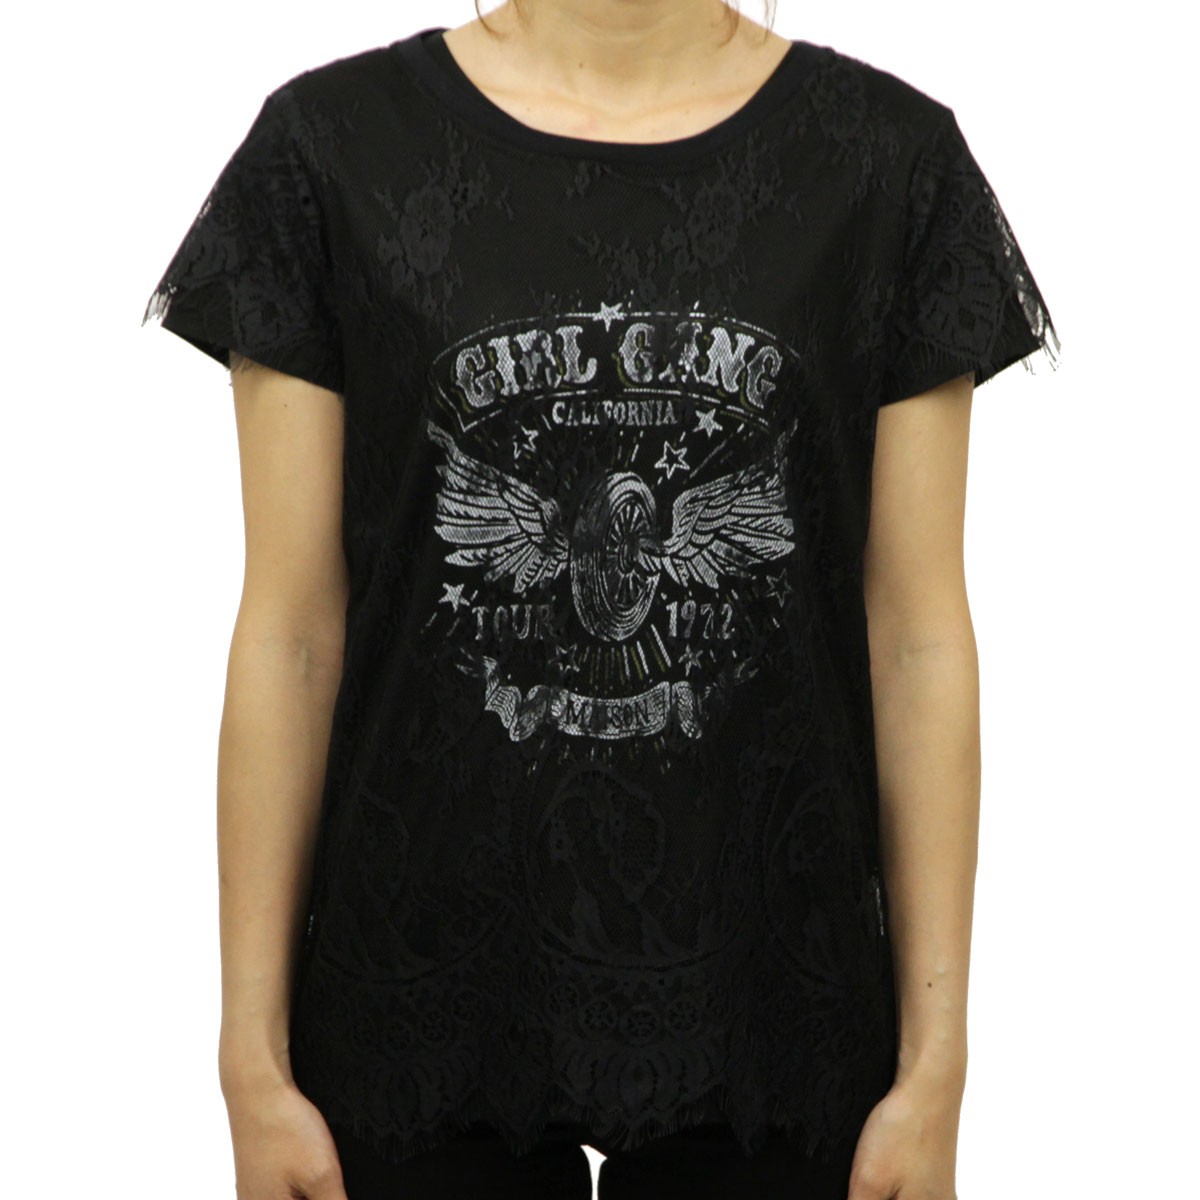 ᥾󥹥å MAISON SCOTCH Ź ǥ ȾµT 2 in 1: Lace tee sold with a rock 'n' roll inspired inner tee 131226 A